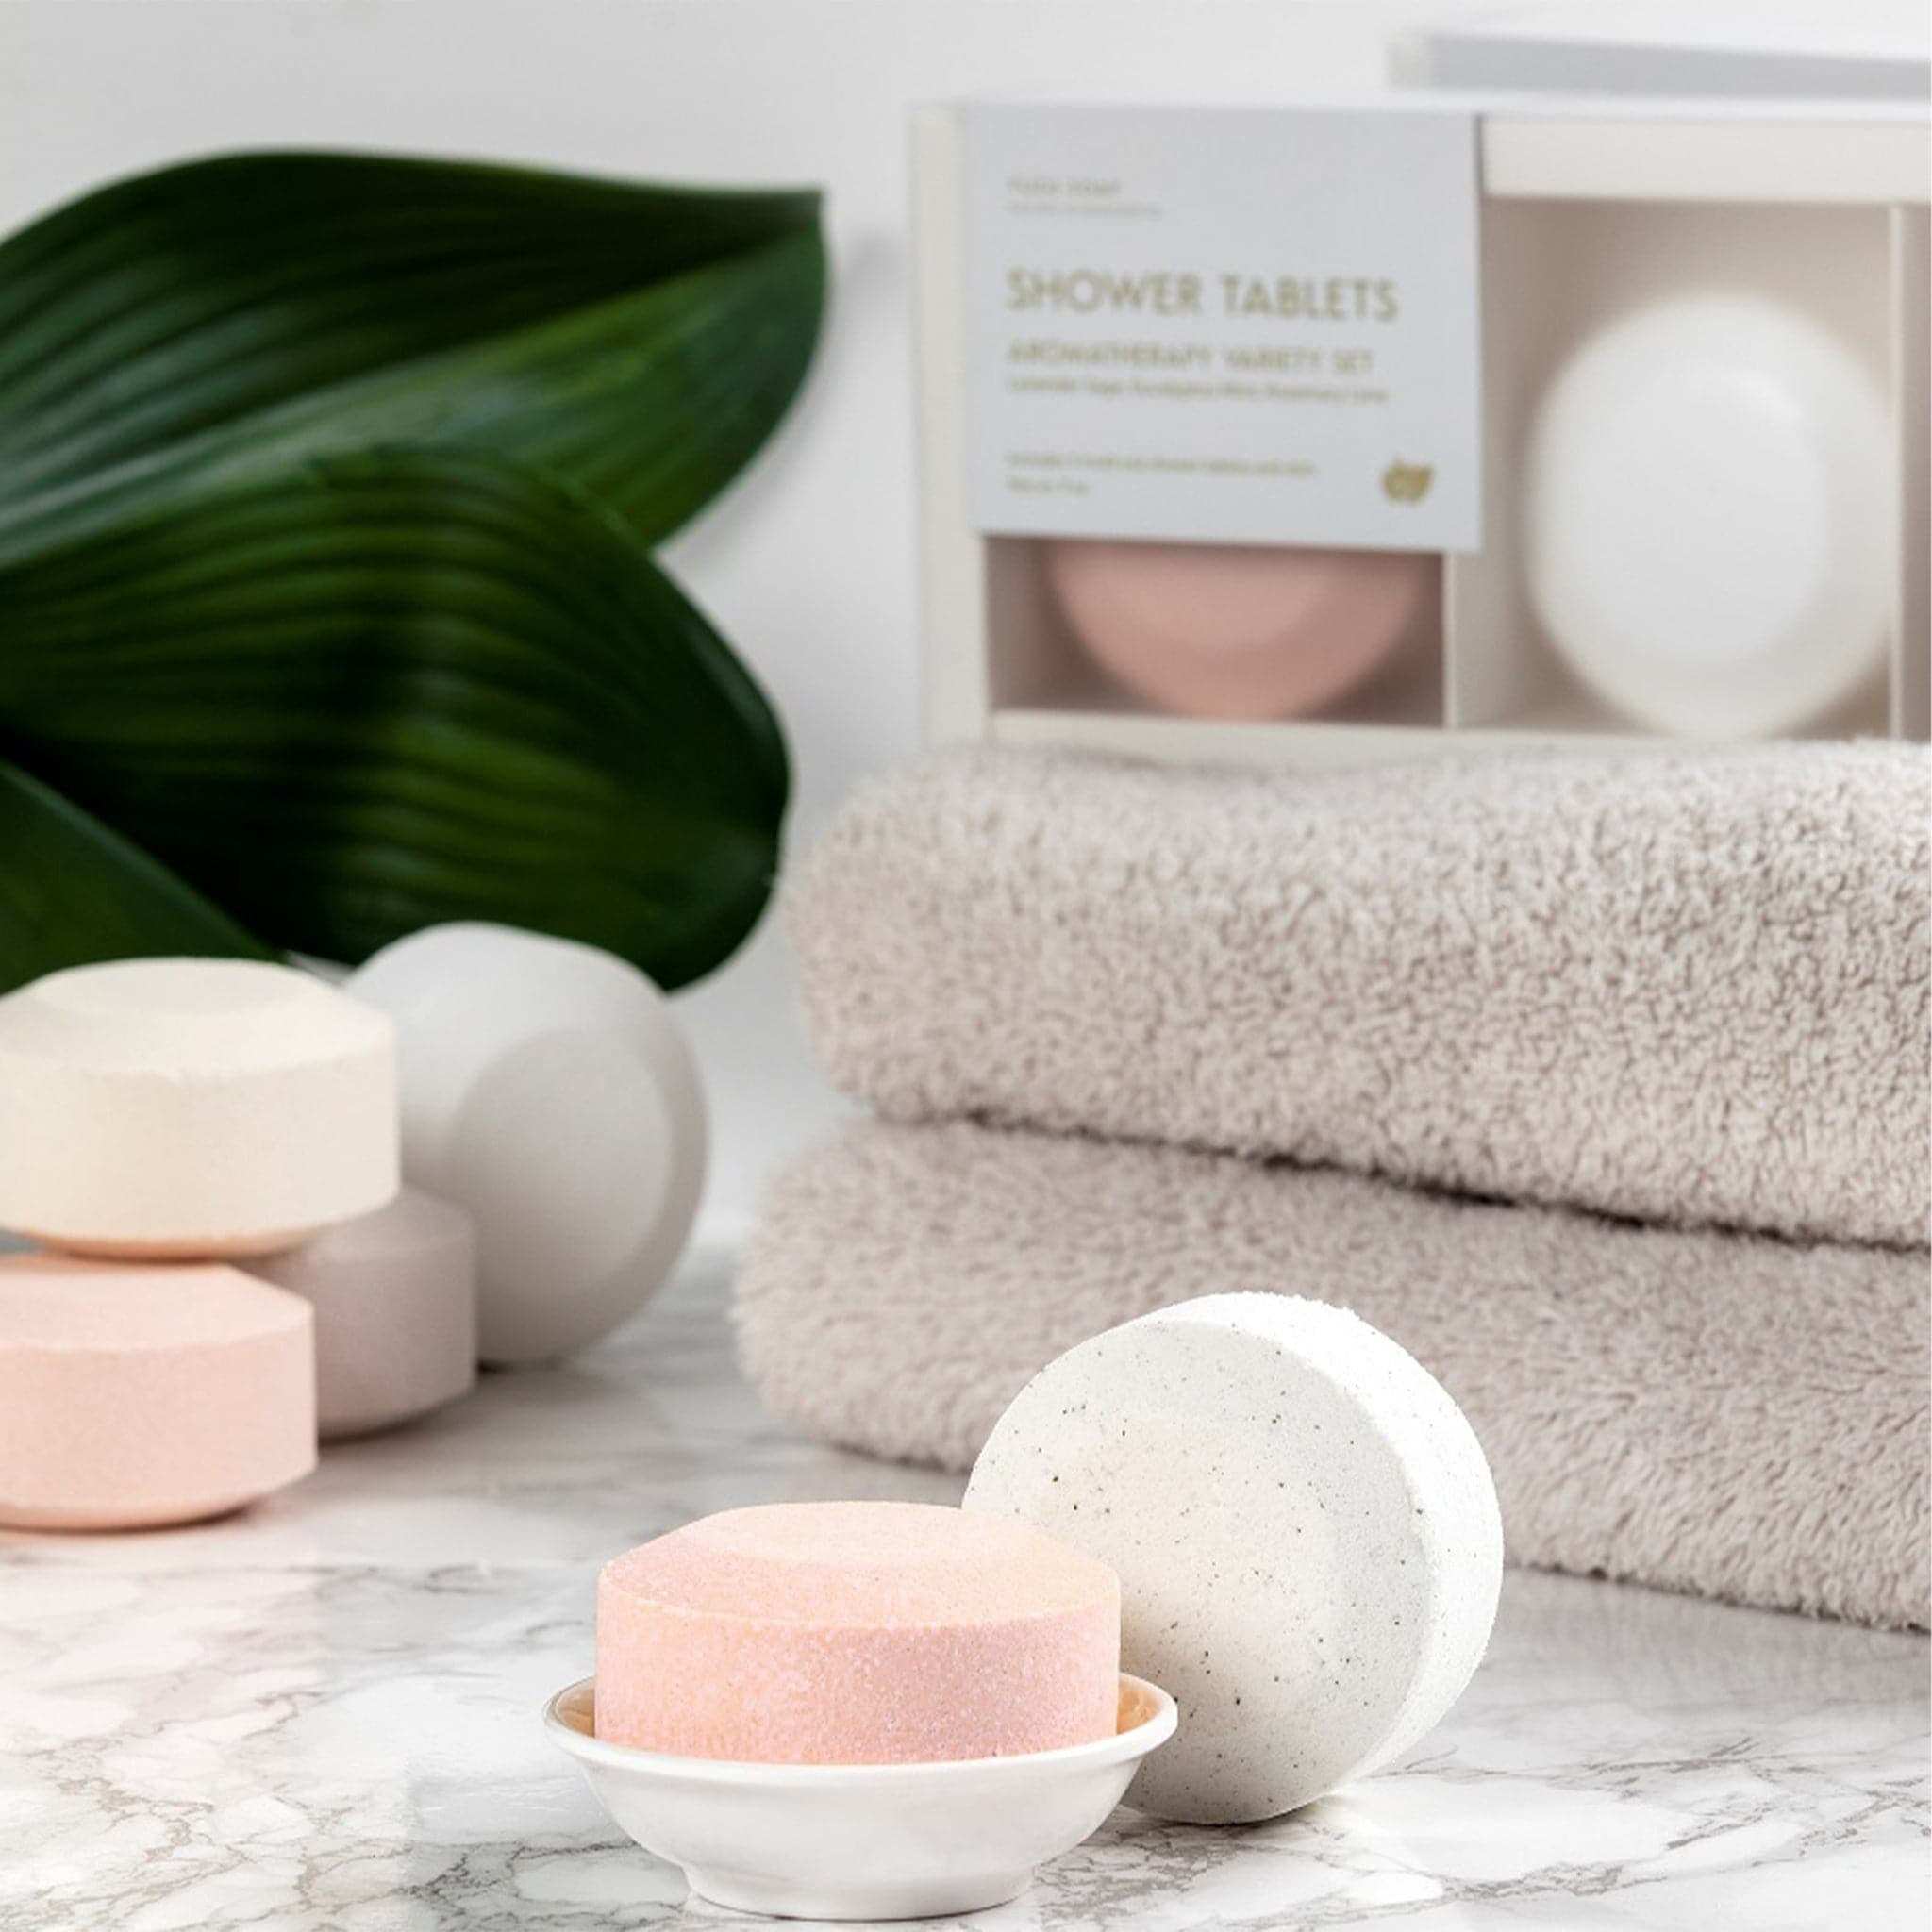 Multiple white and pink shower tablets on a marble bathroom counter with natural colored towels and the dark leaves of a plant. The shower tablets are about palm sized.